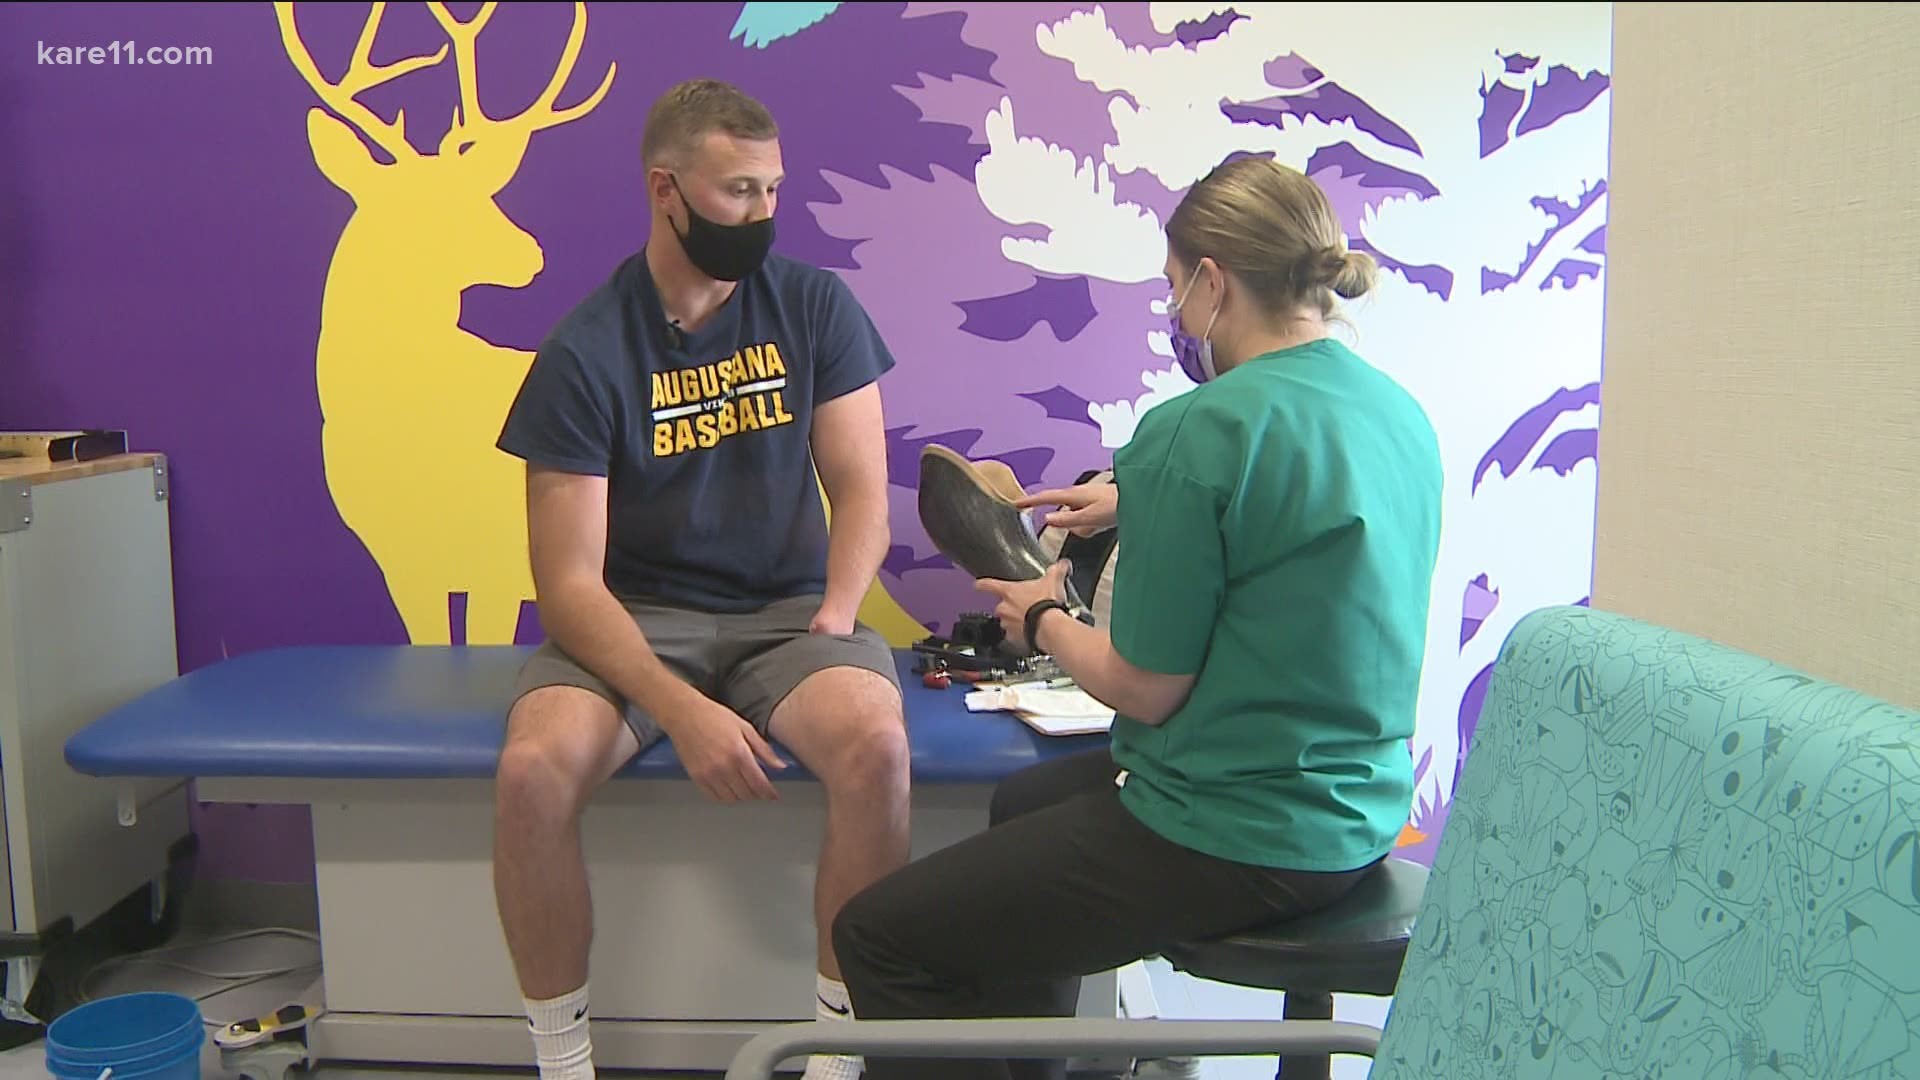 Parker Hanson, a former pitcher at Augustana University in South Dakota, was was fitted for a new prosthetic arm on Friday at Shiners Children's in Woodbury